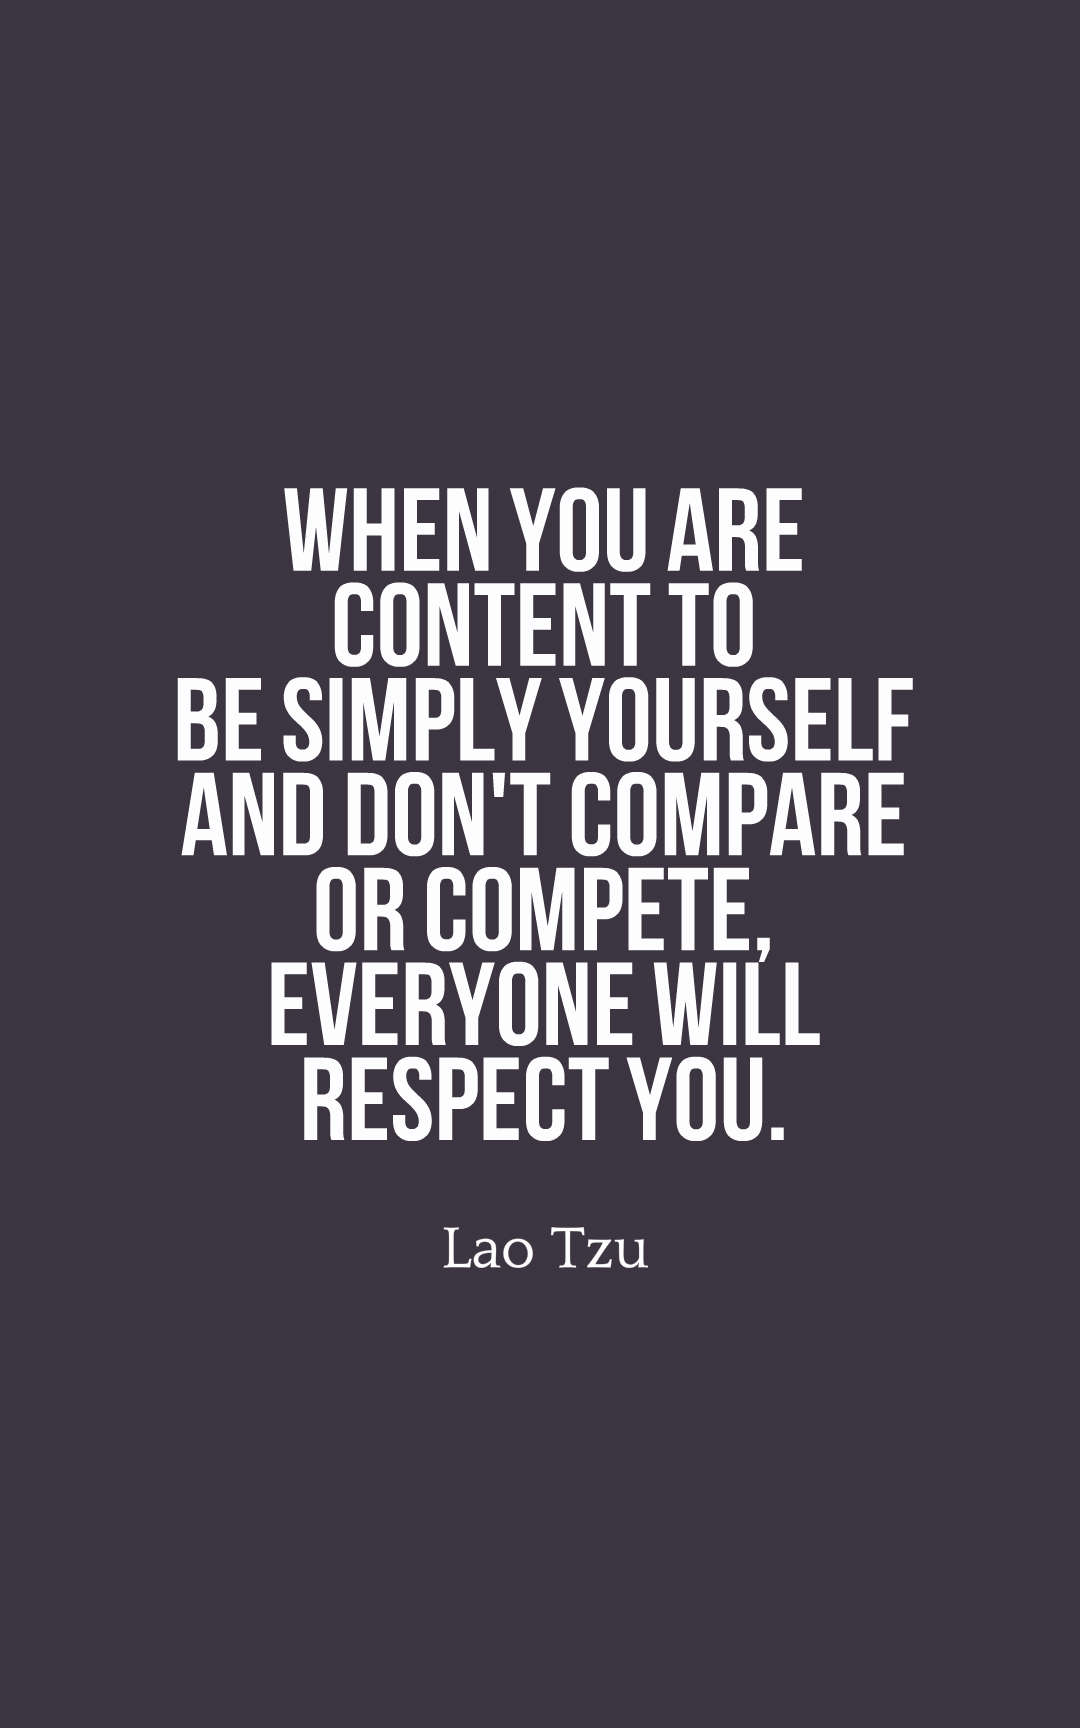 When you are content to be simply yourself and don't compare or compete, everyone will respect you.